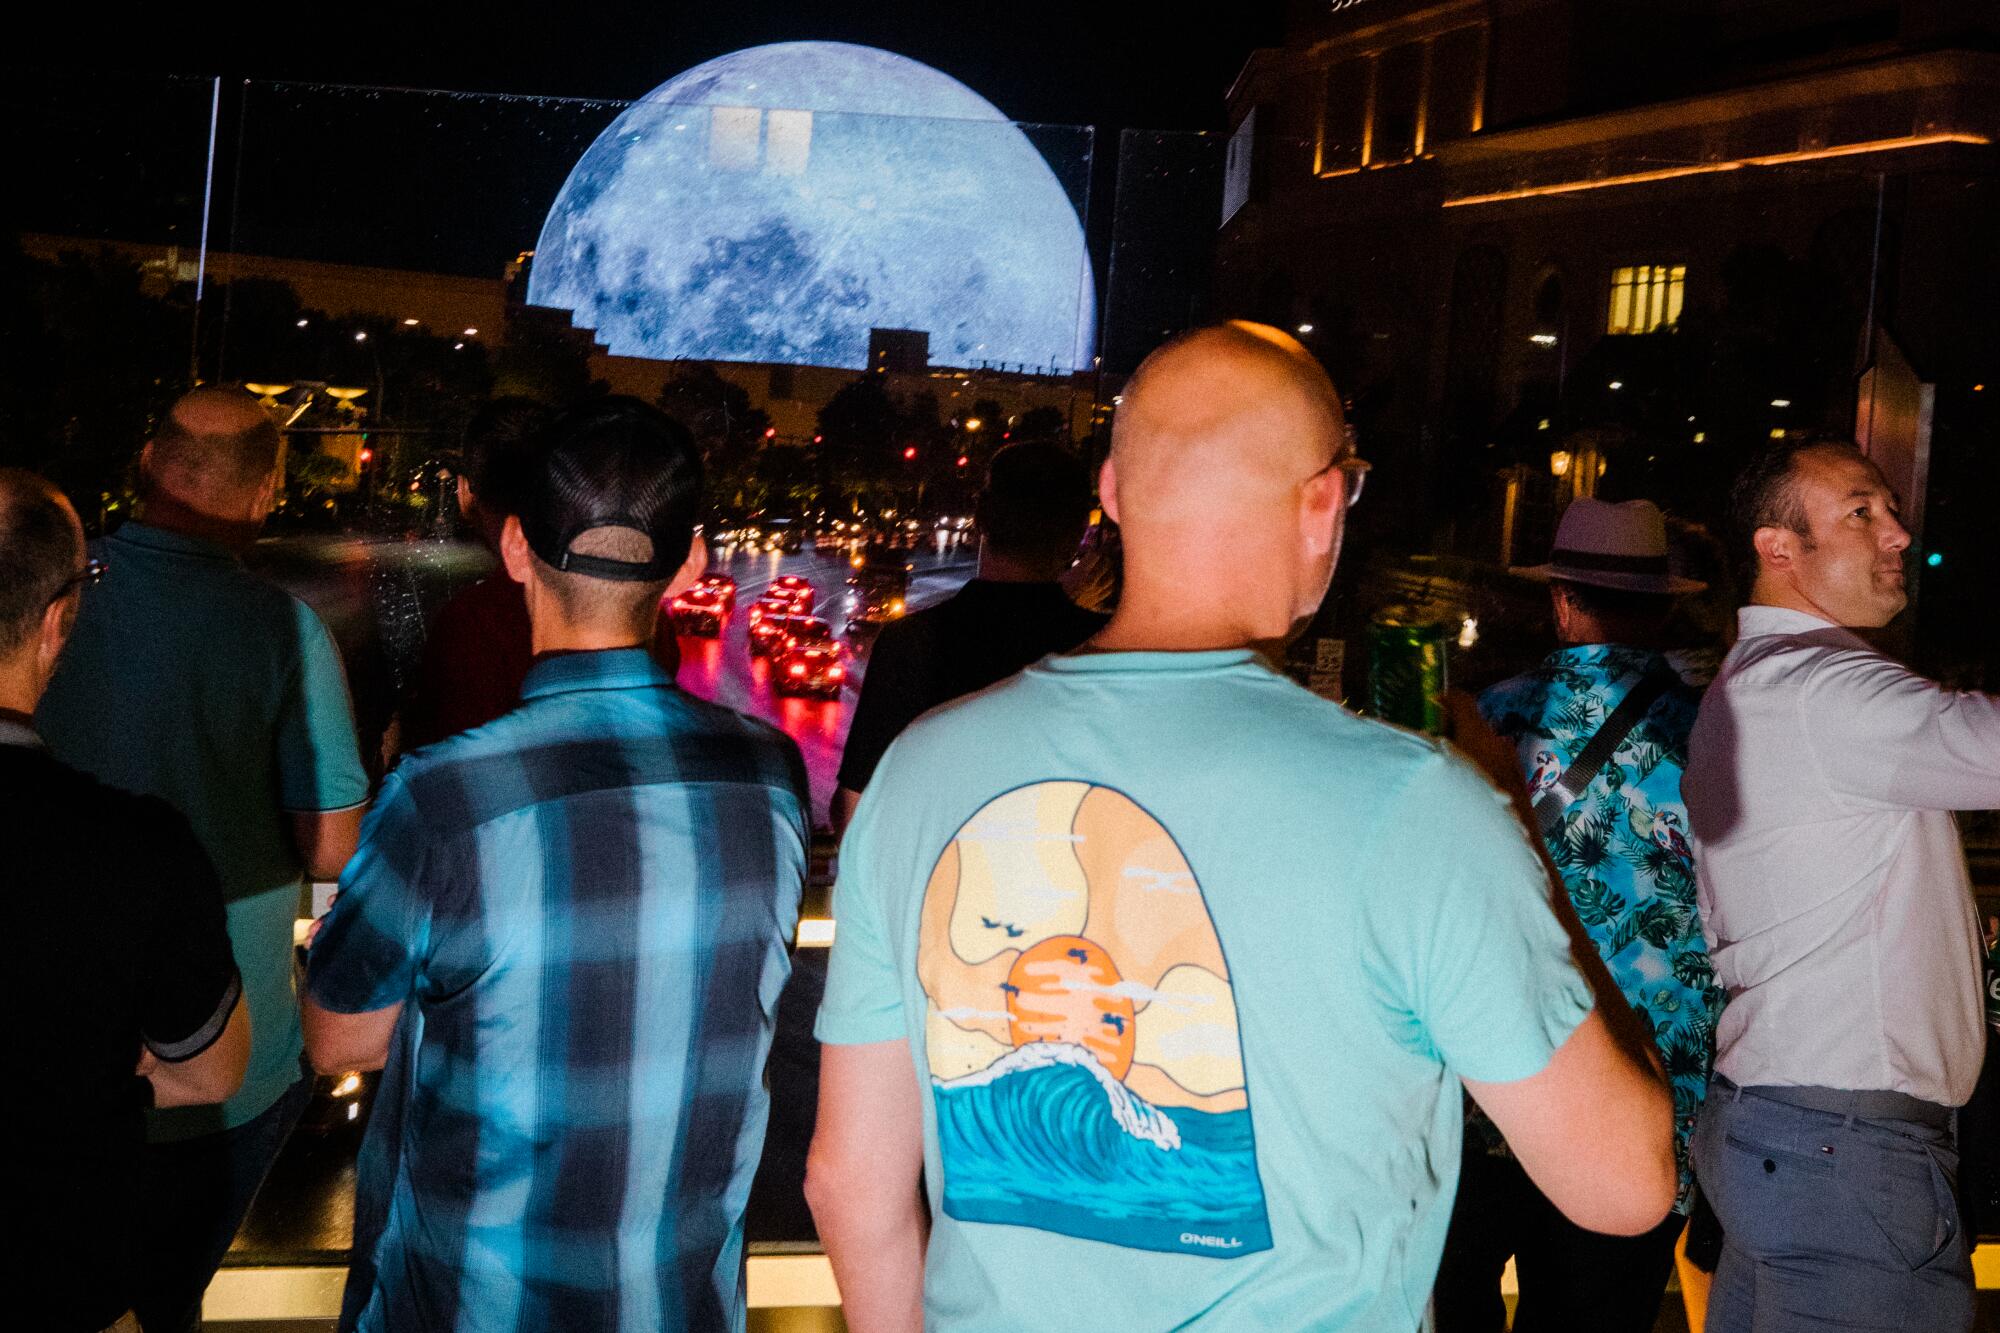 People view a spherical building broadcasting images of the moon from a pedestrian bridge over a busy street.